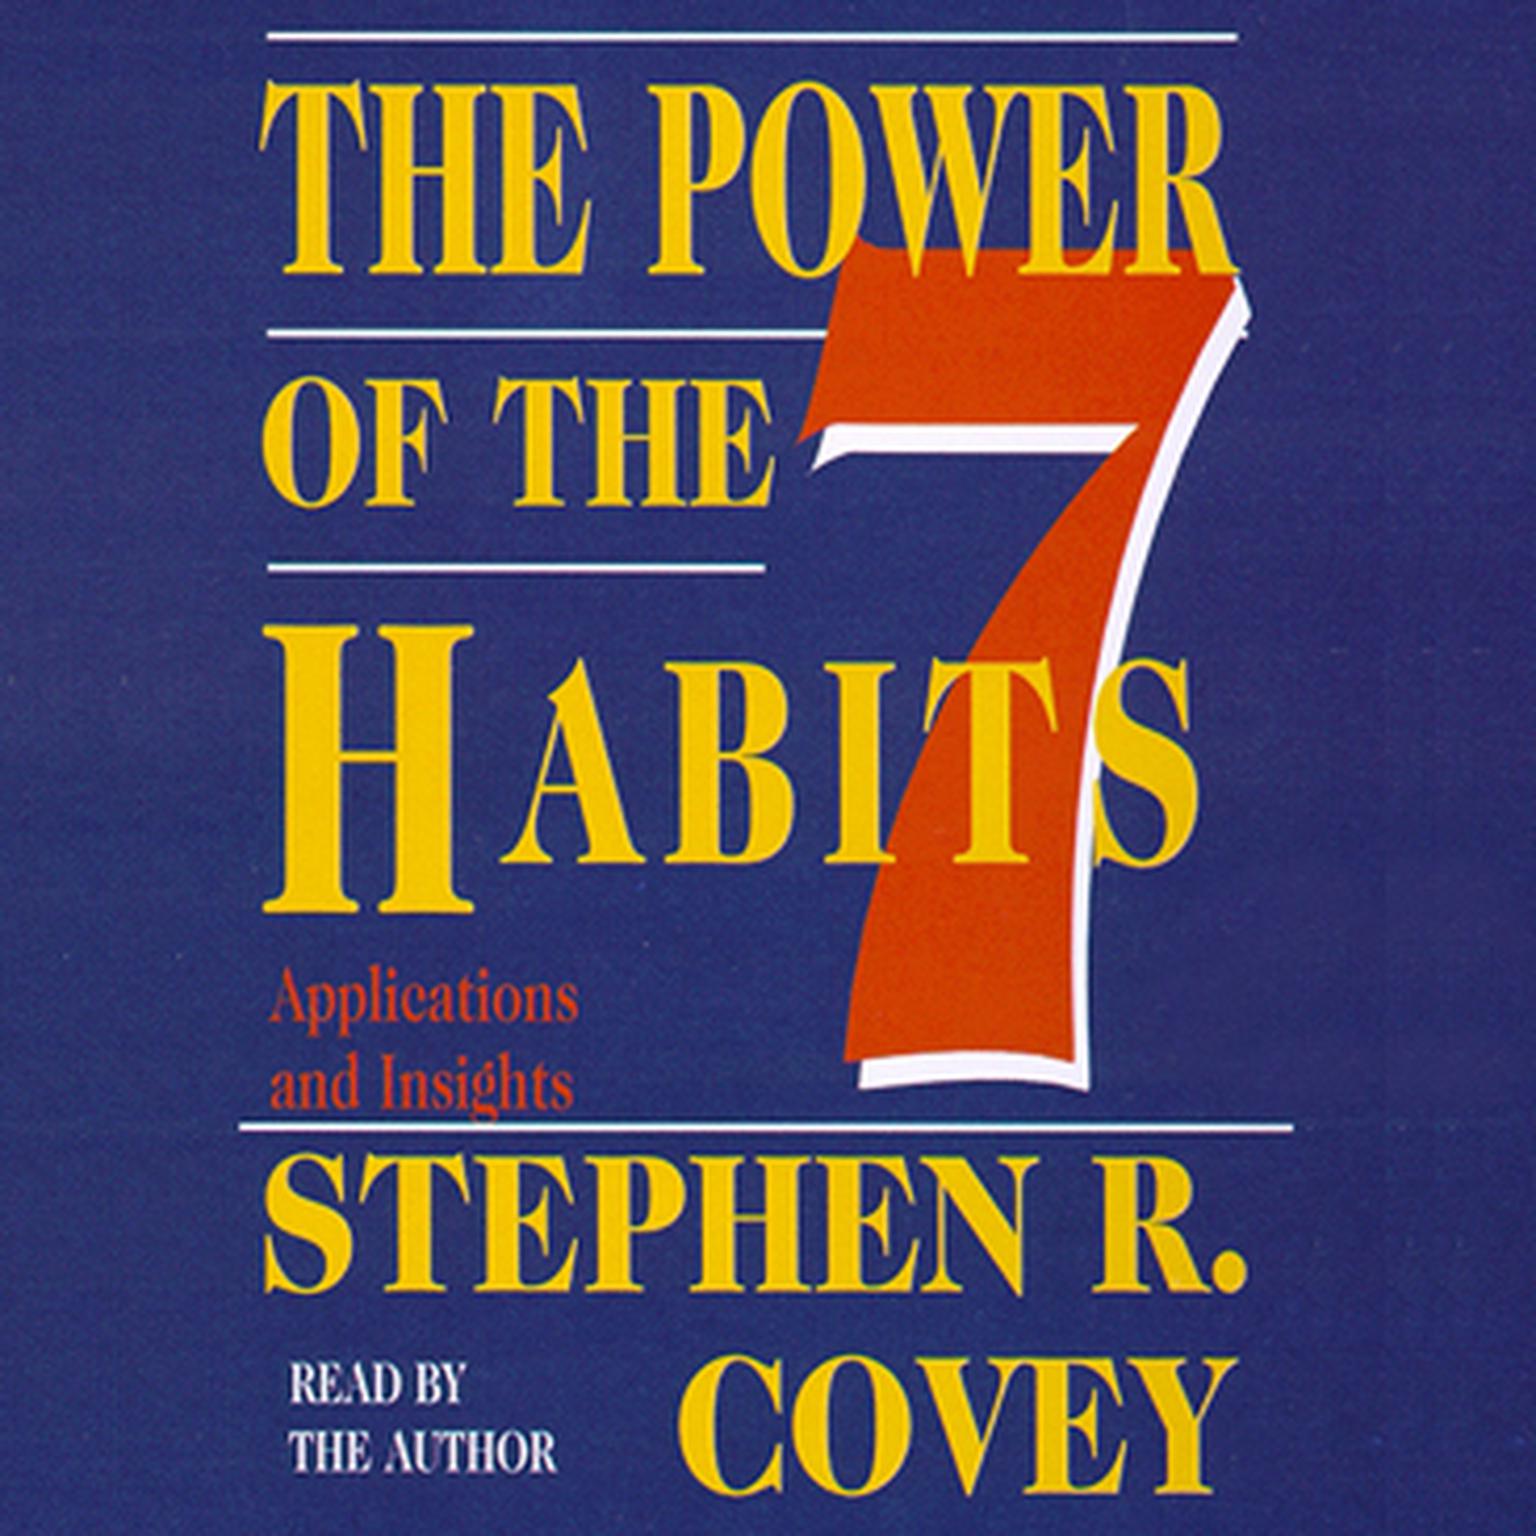 The Power of the 7 Habits (Abridged): Applications and Insights Audiobook, by Stephen R. Covey